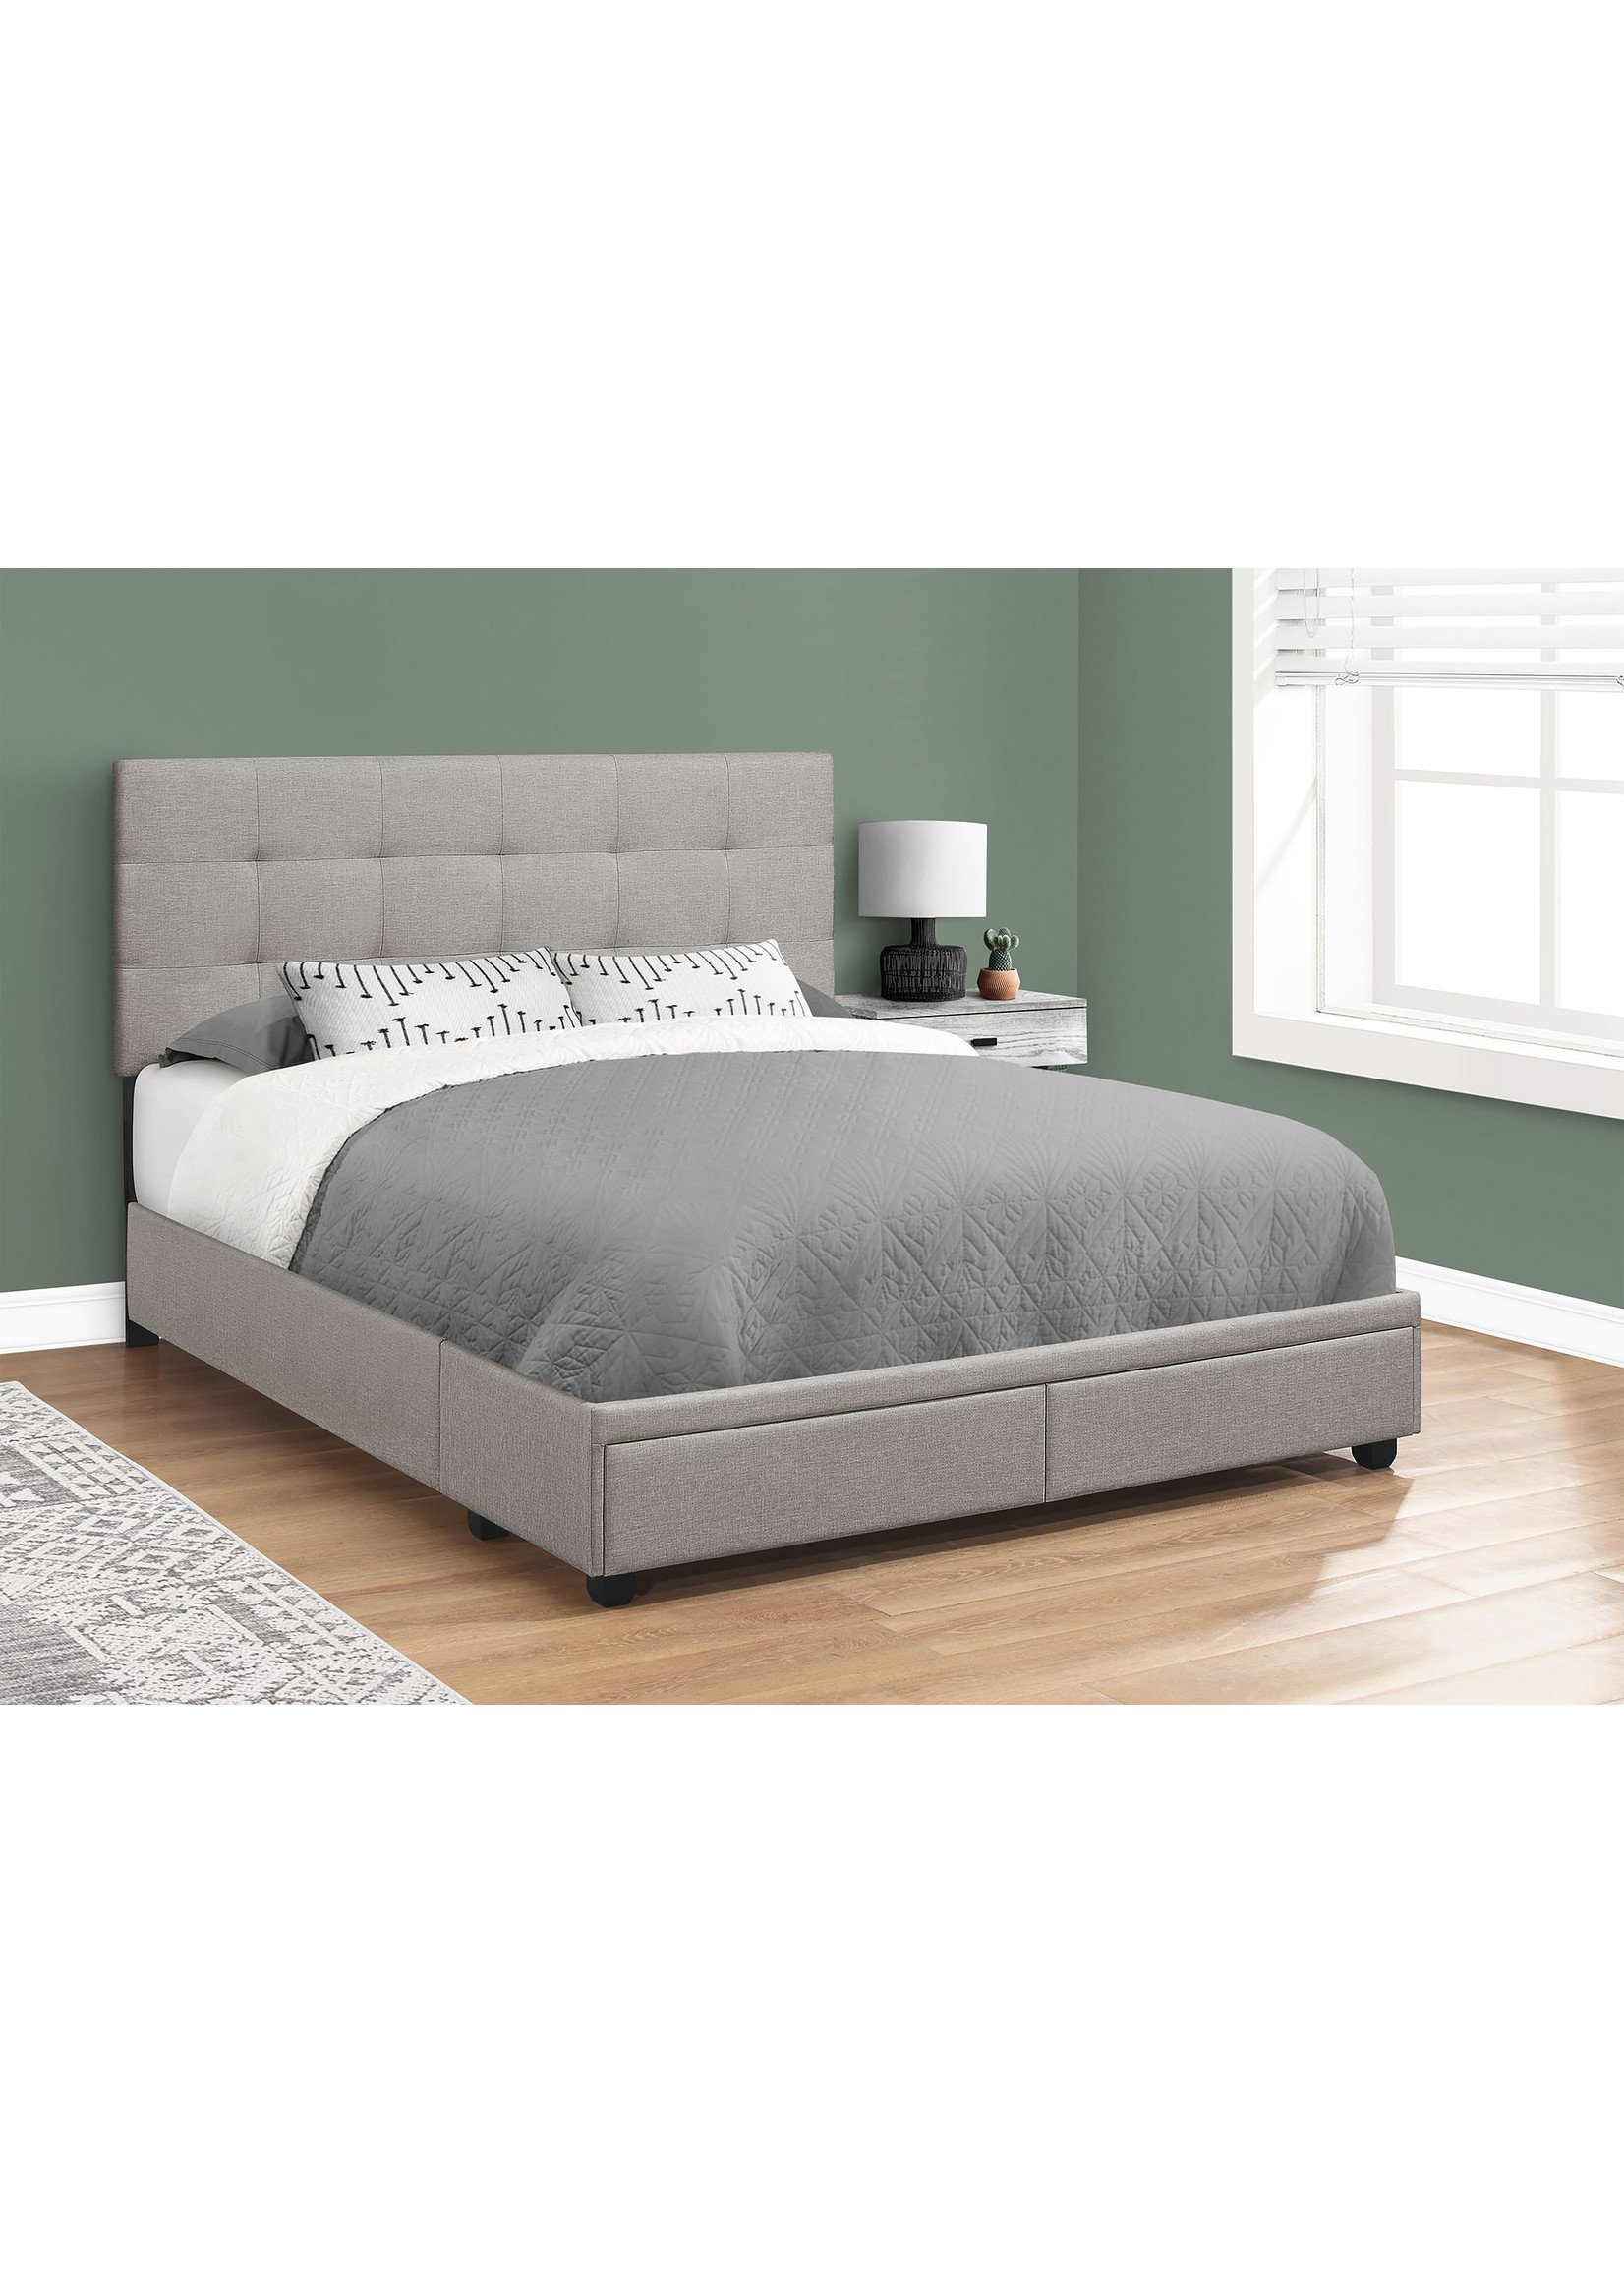 QUEEN GREY LINEN BED FRAME WITH 2 STRORAGE DRAWERS